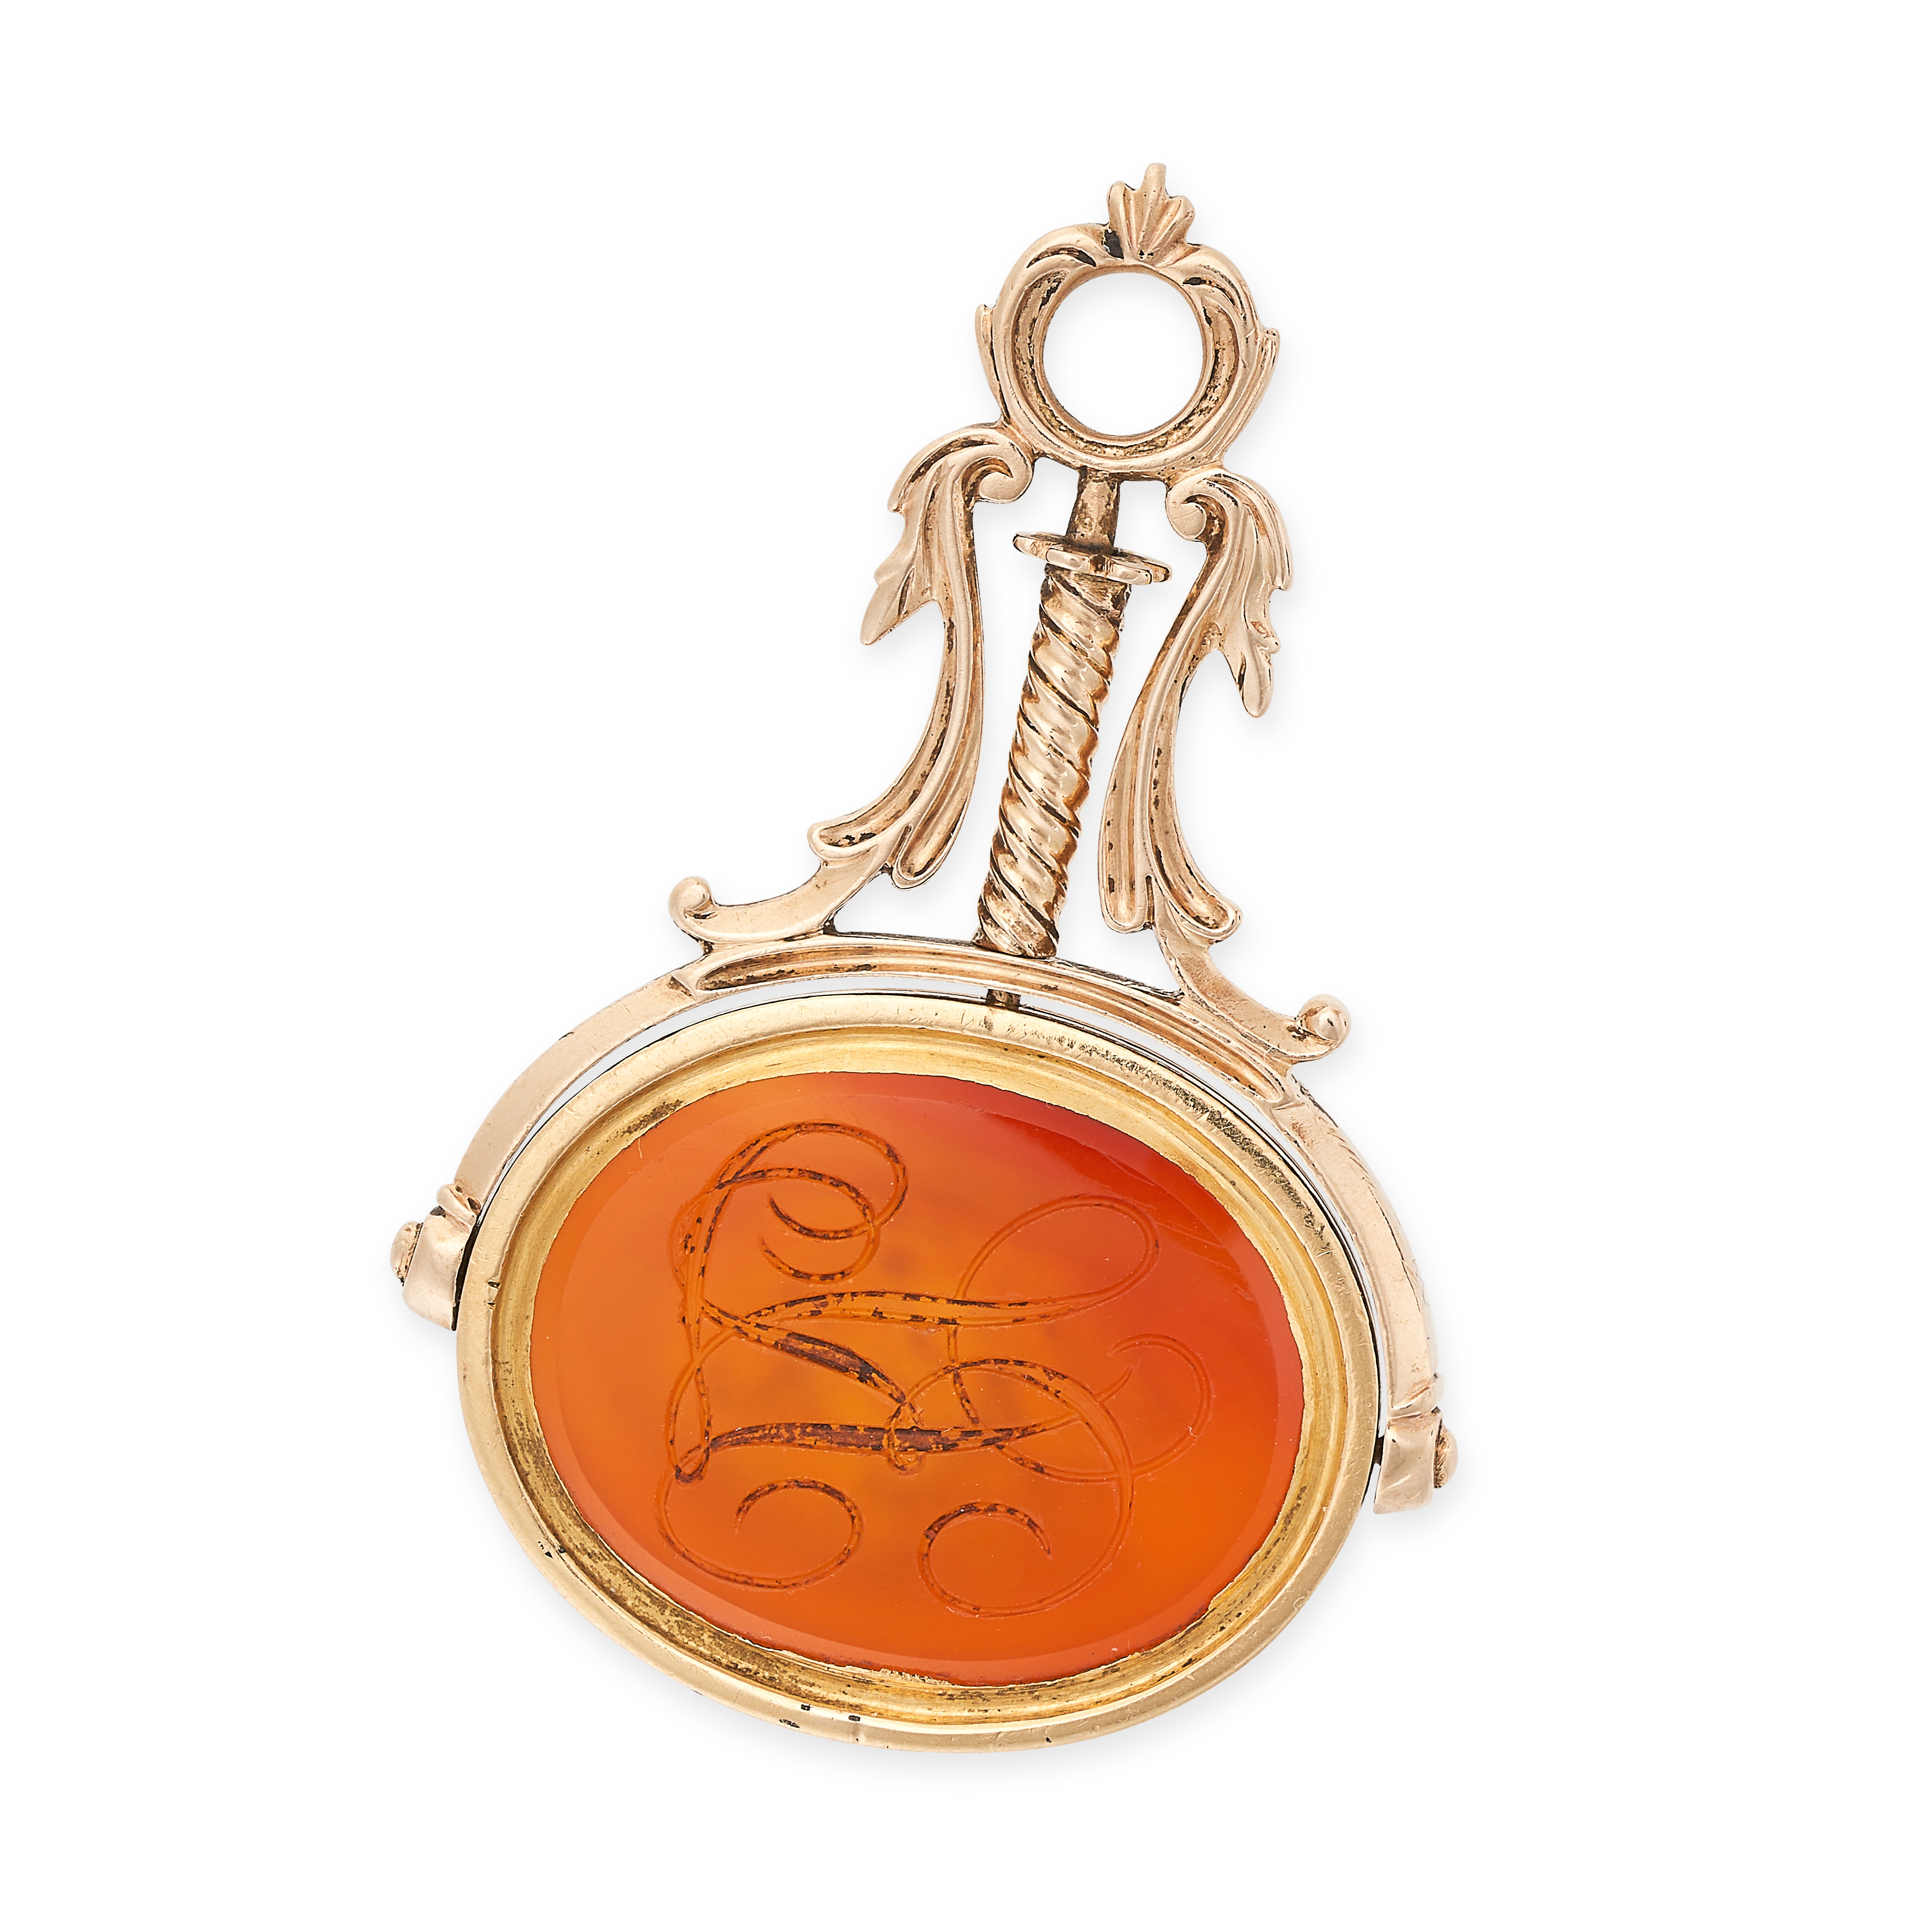 NO RESERVE - AN ANTIQUE CARNELIAN SWIVEL FOB SEAL PENDANT, LATE 18TH CENTURY in yellow gold, set - Image 2 of 3